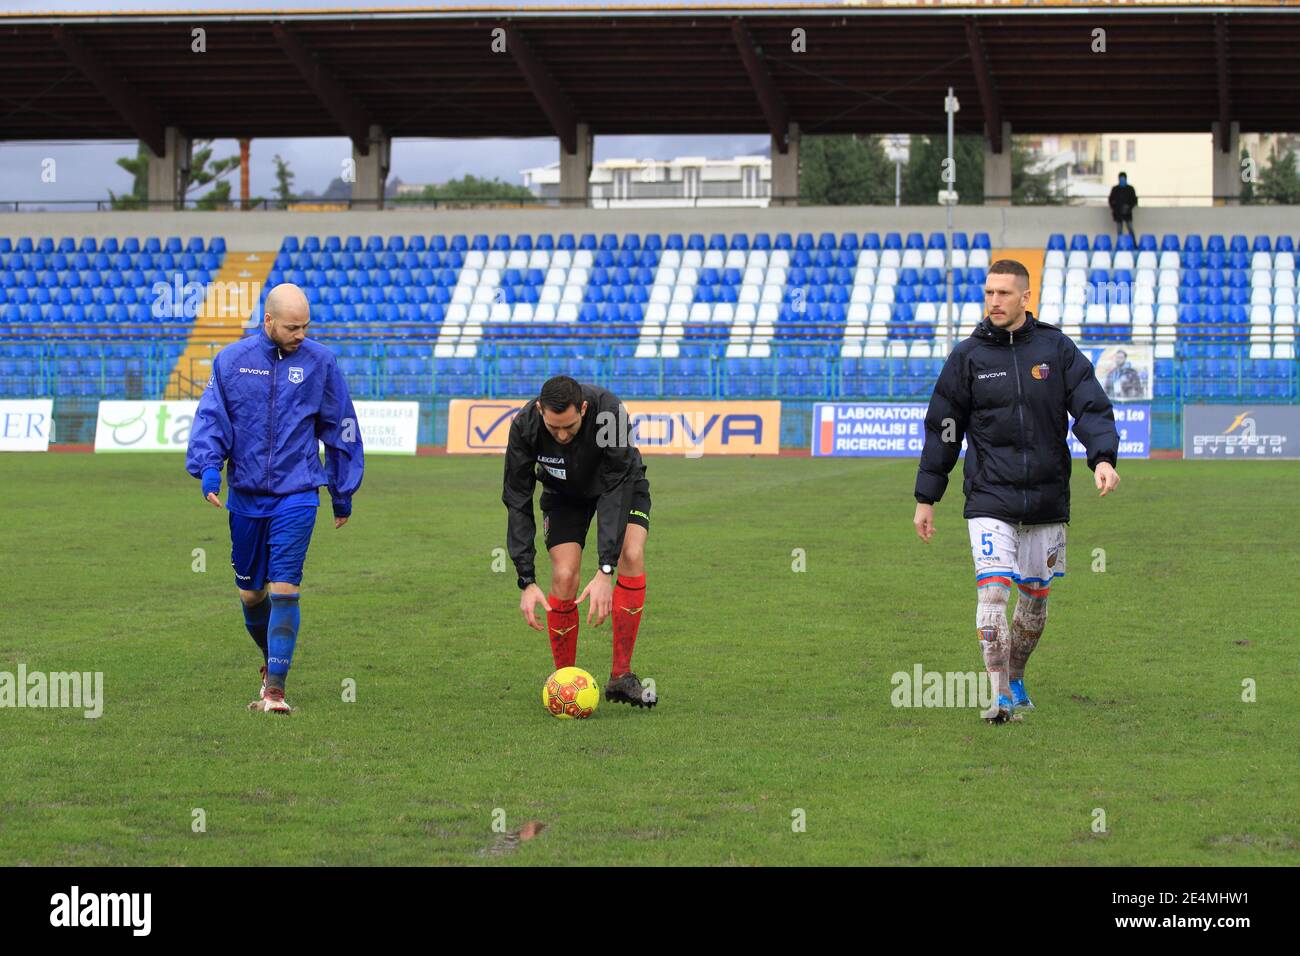 Pagani, Italy. 24th Jan, 2021. Serie C Italian Championship, Girone C Pro  League football match between Paganese and Catania, 20th day of the  championship. At the third inspection, the referee Andrea Colombo